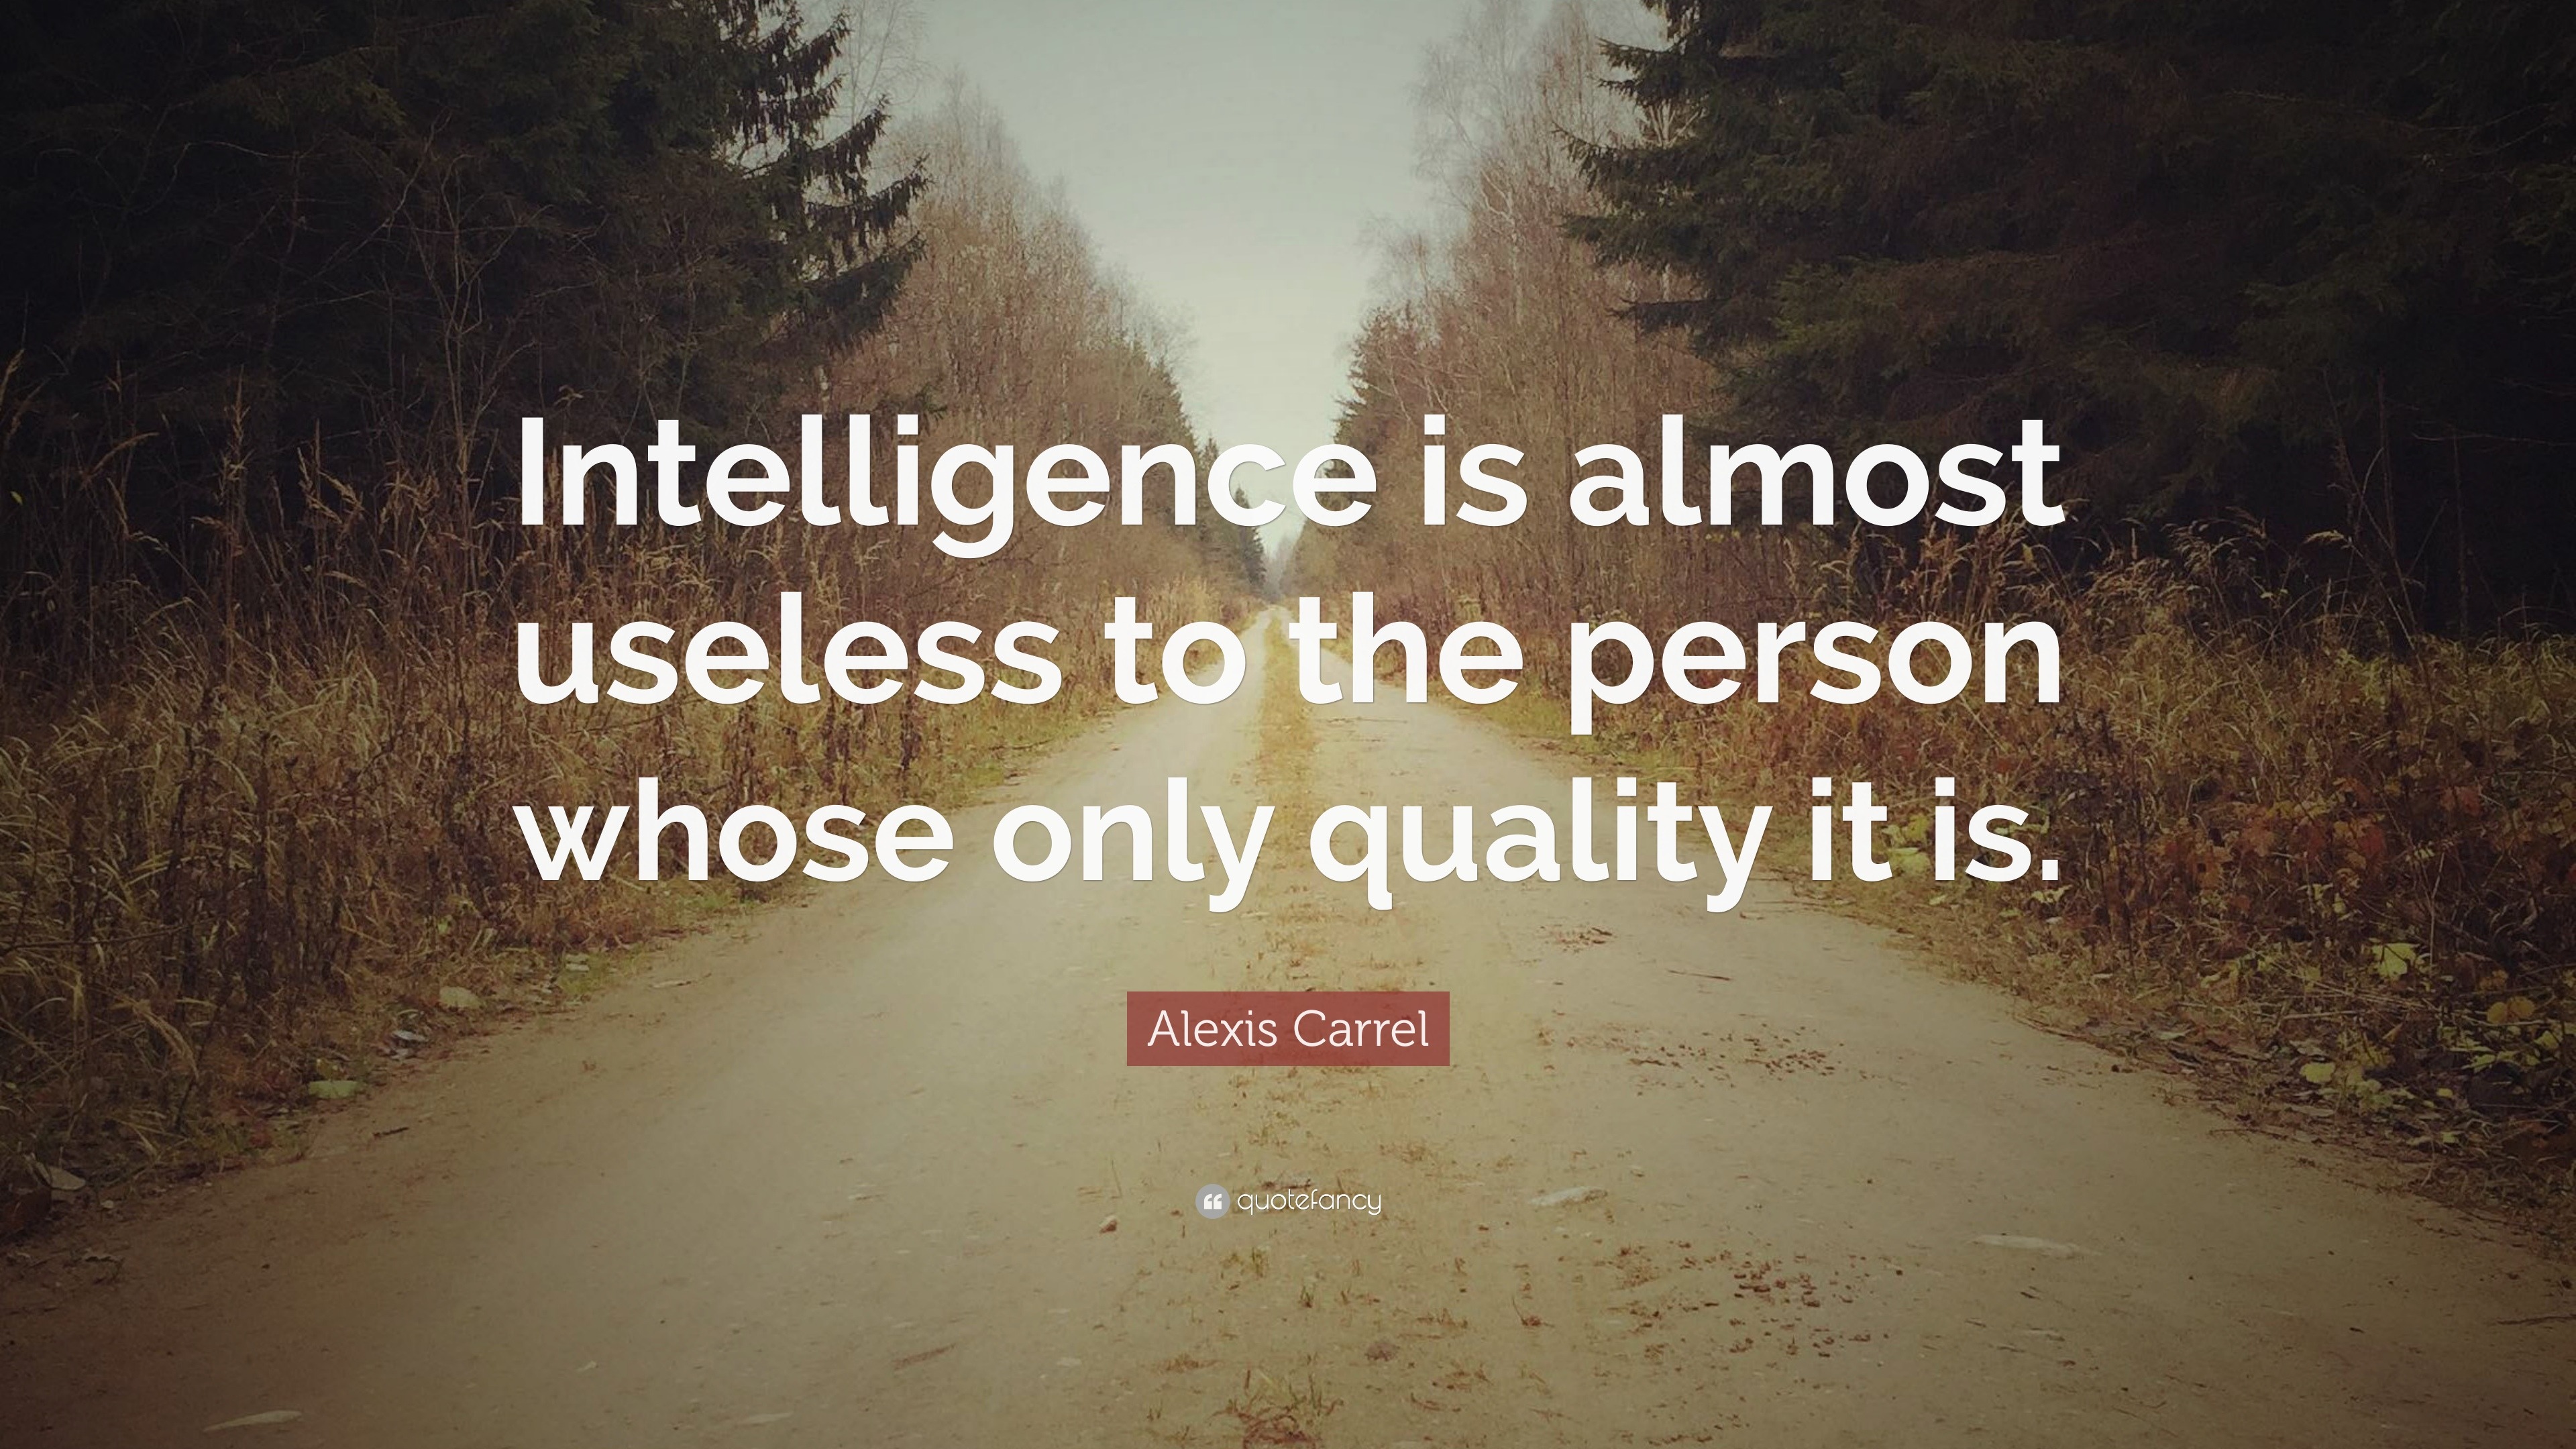 Alexis Carrel Quote: “Intelligence is almost useless to the person ...